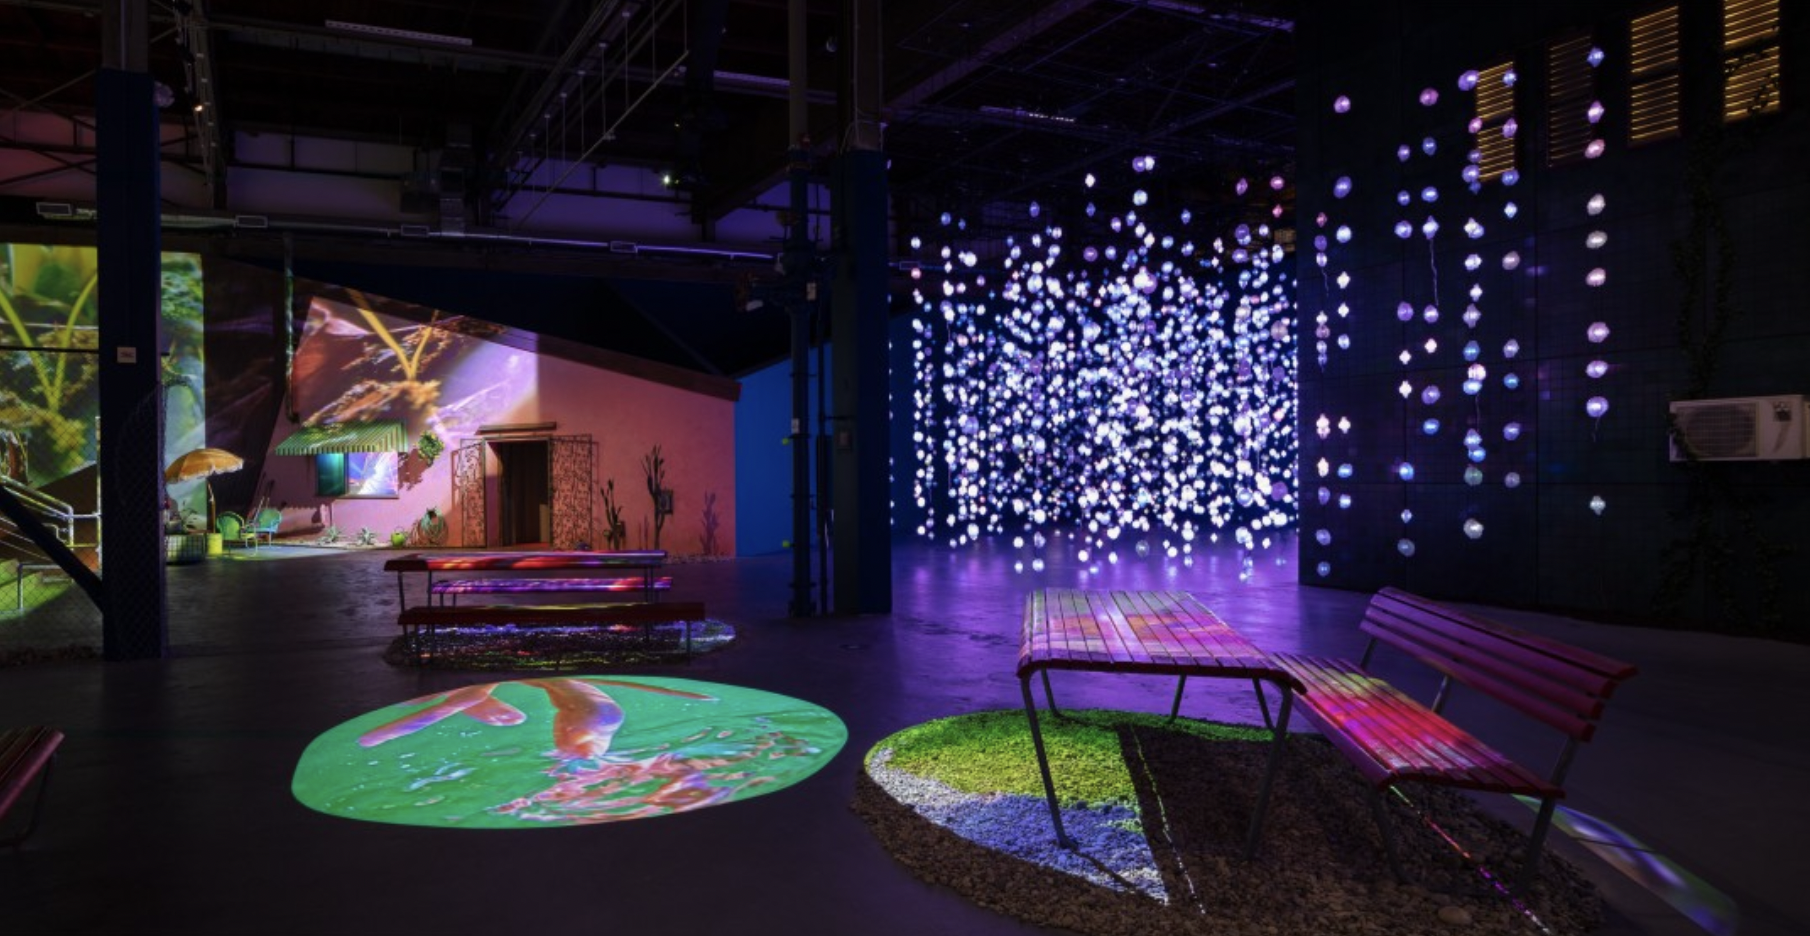 Installation view of Pipilotti Rist: Big Heartedness, Be My Neighbor, at The